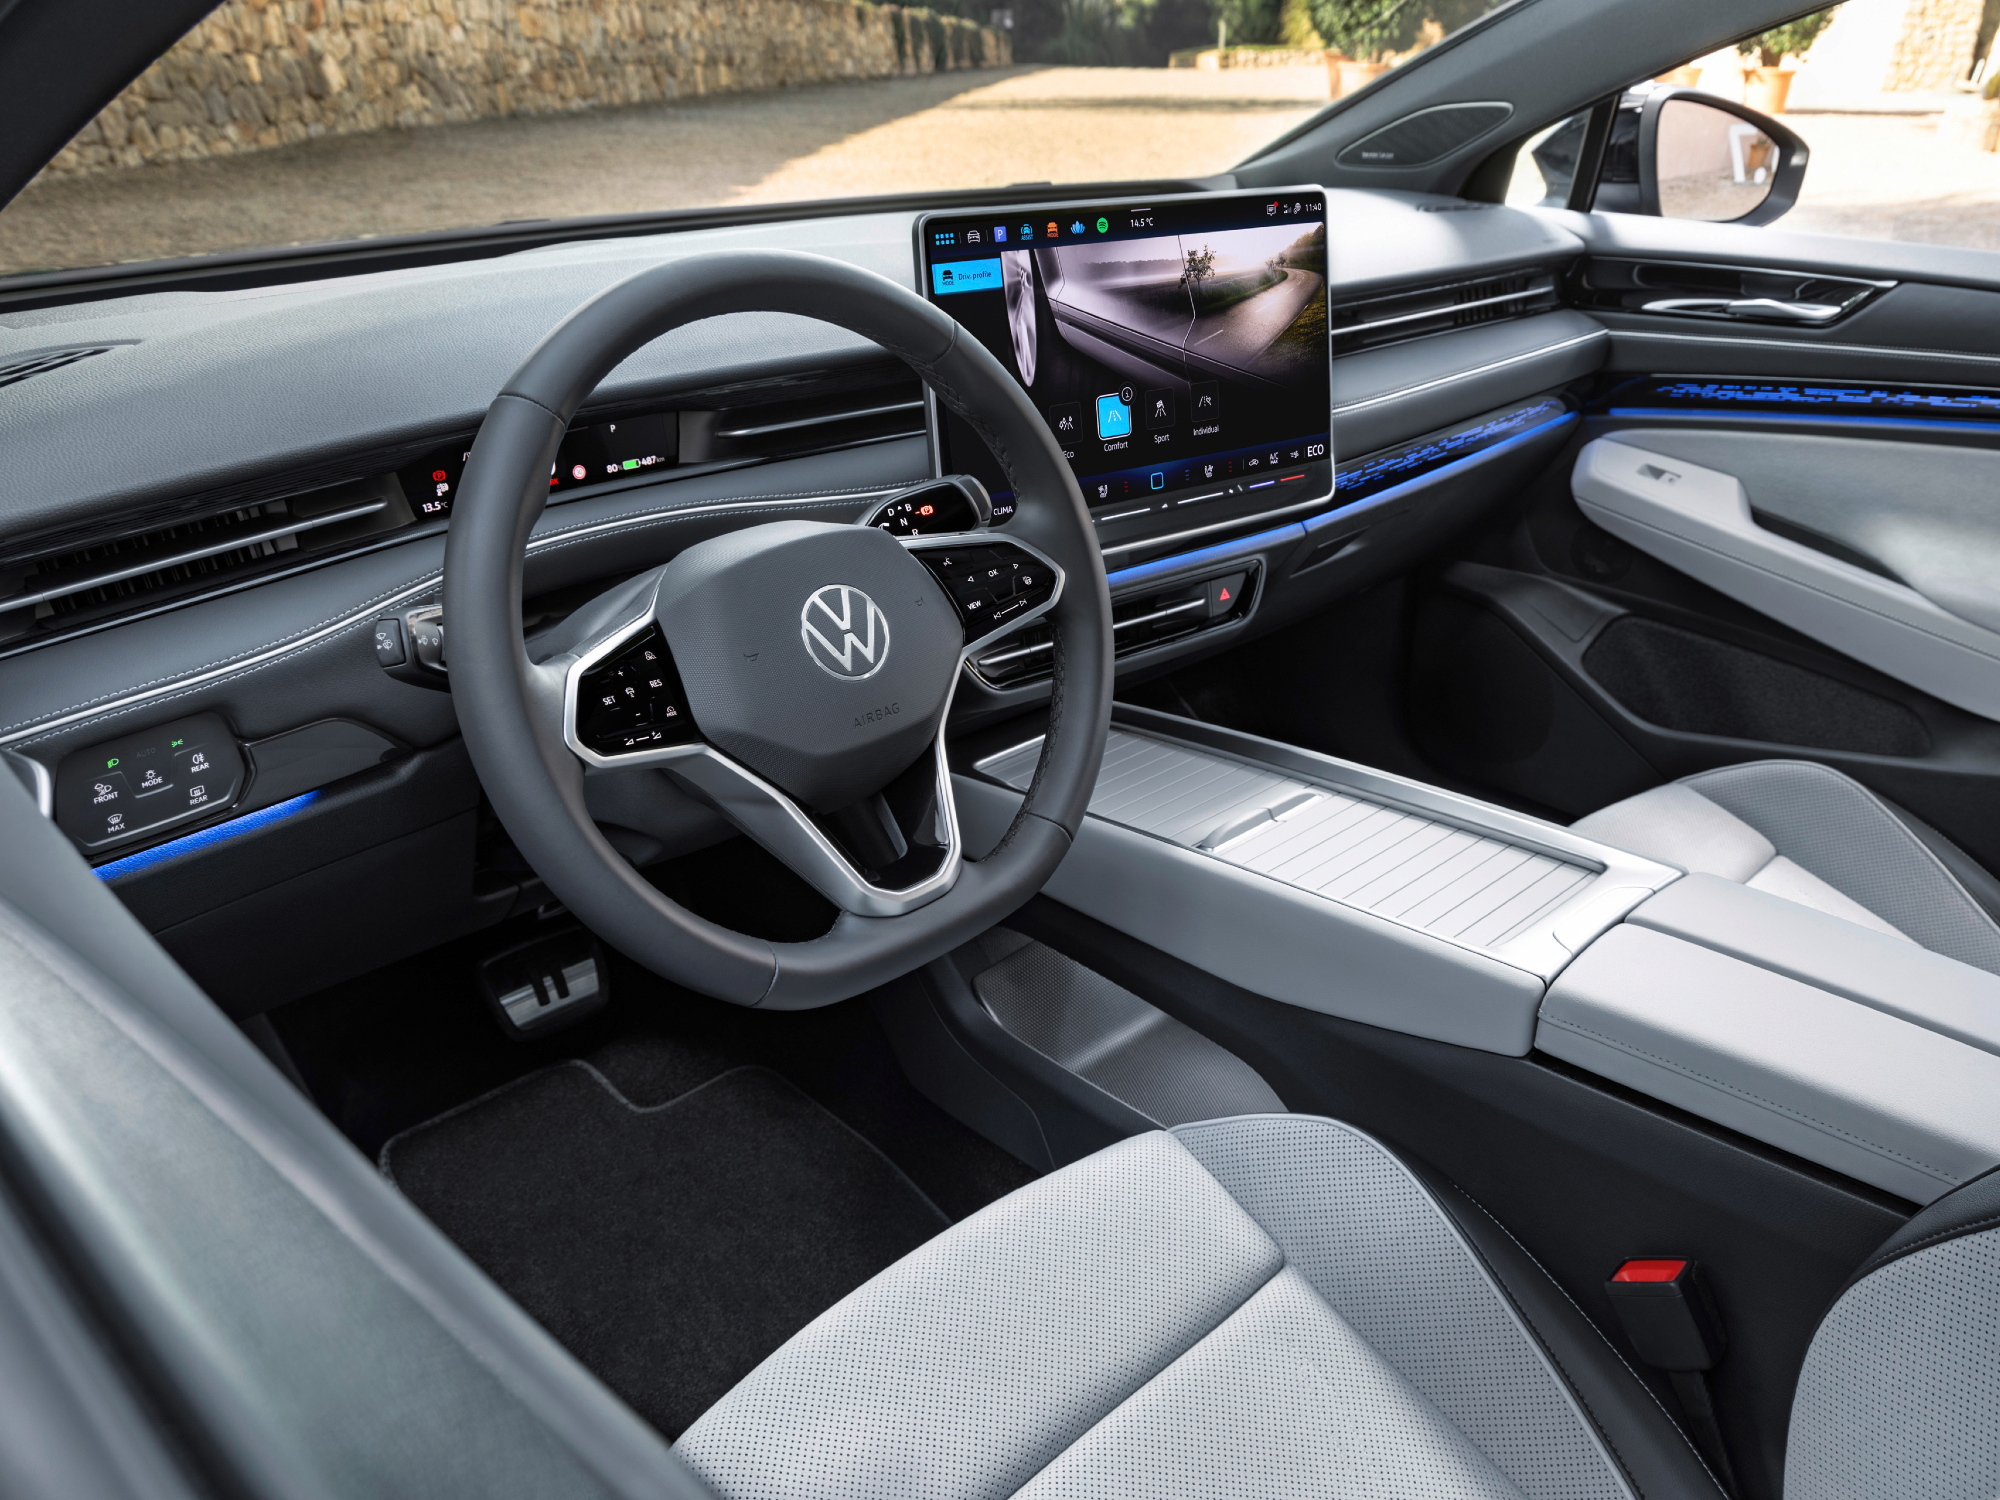 VW ID.7 concept interior image through driver's window showing large center display and console.